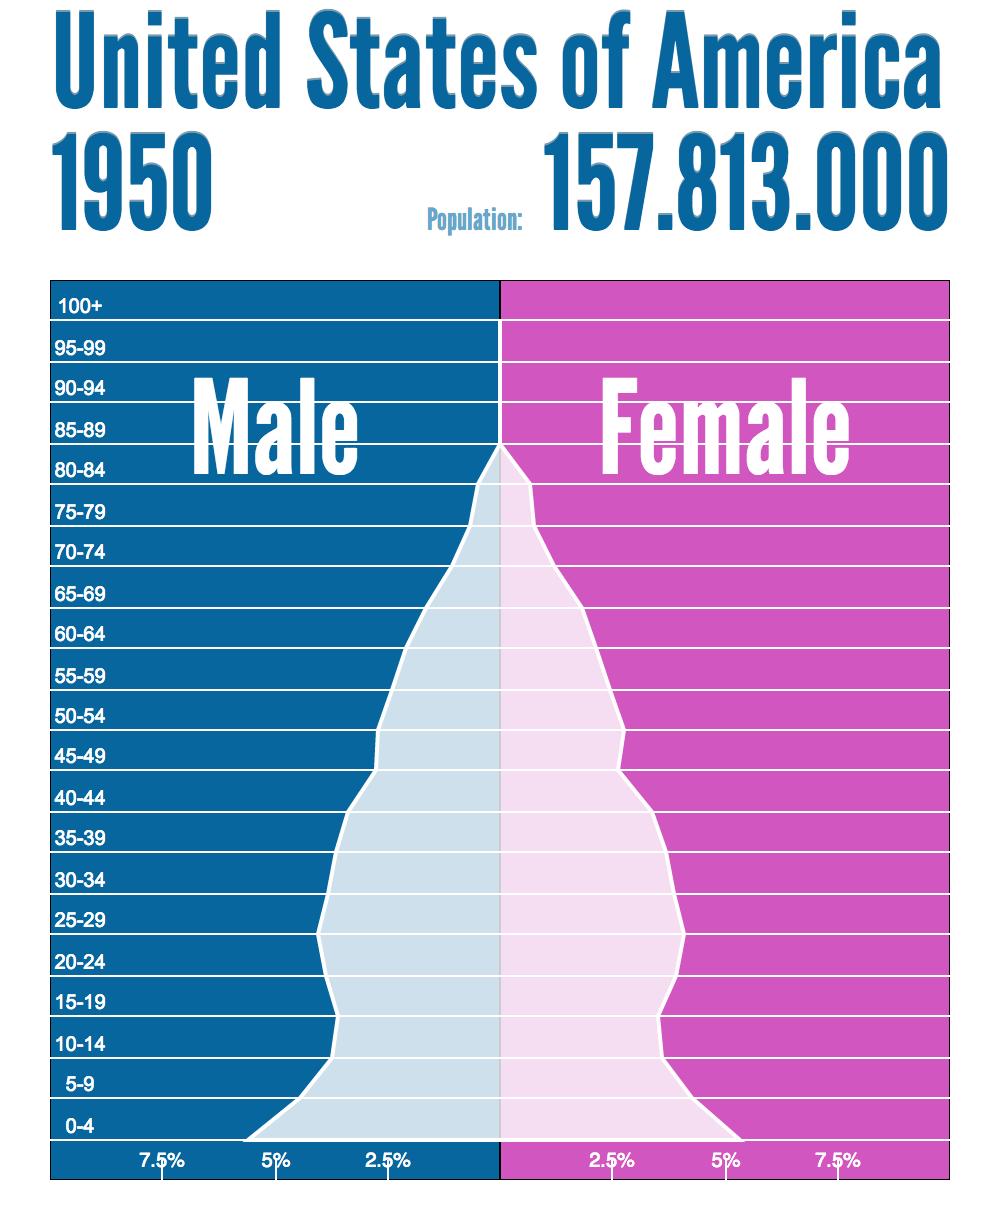 The three figures below show the population distributions for the United States for the same years two historic, and one projected.